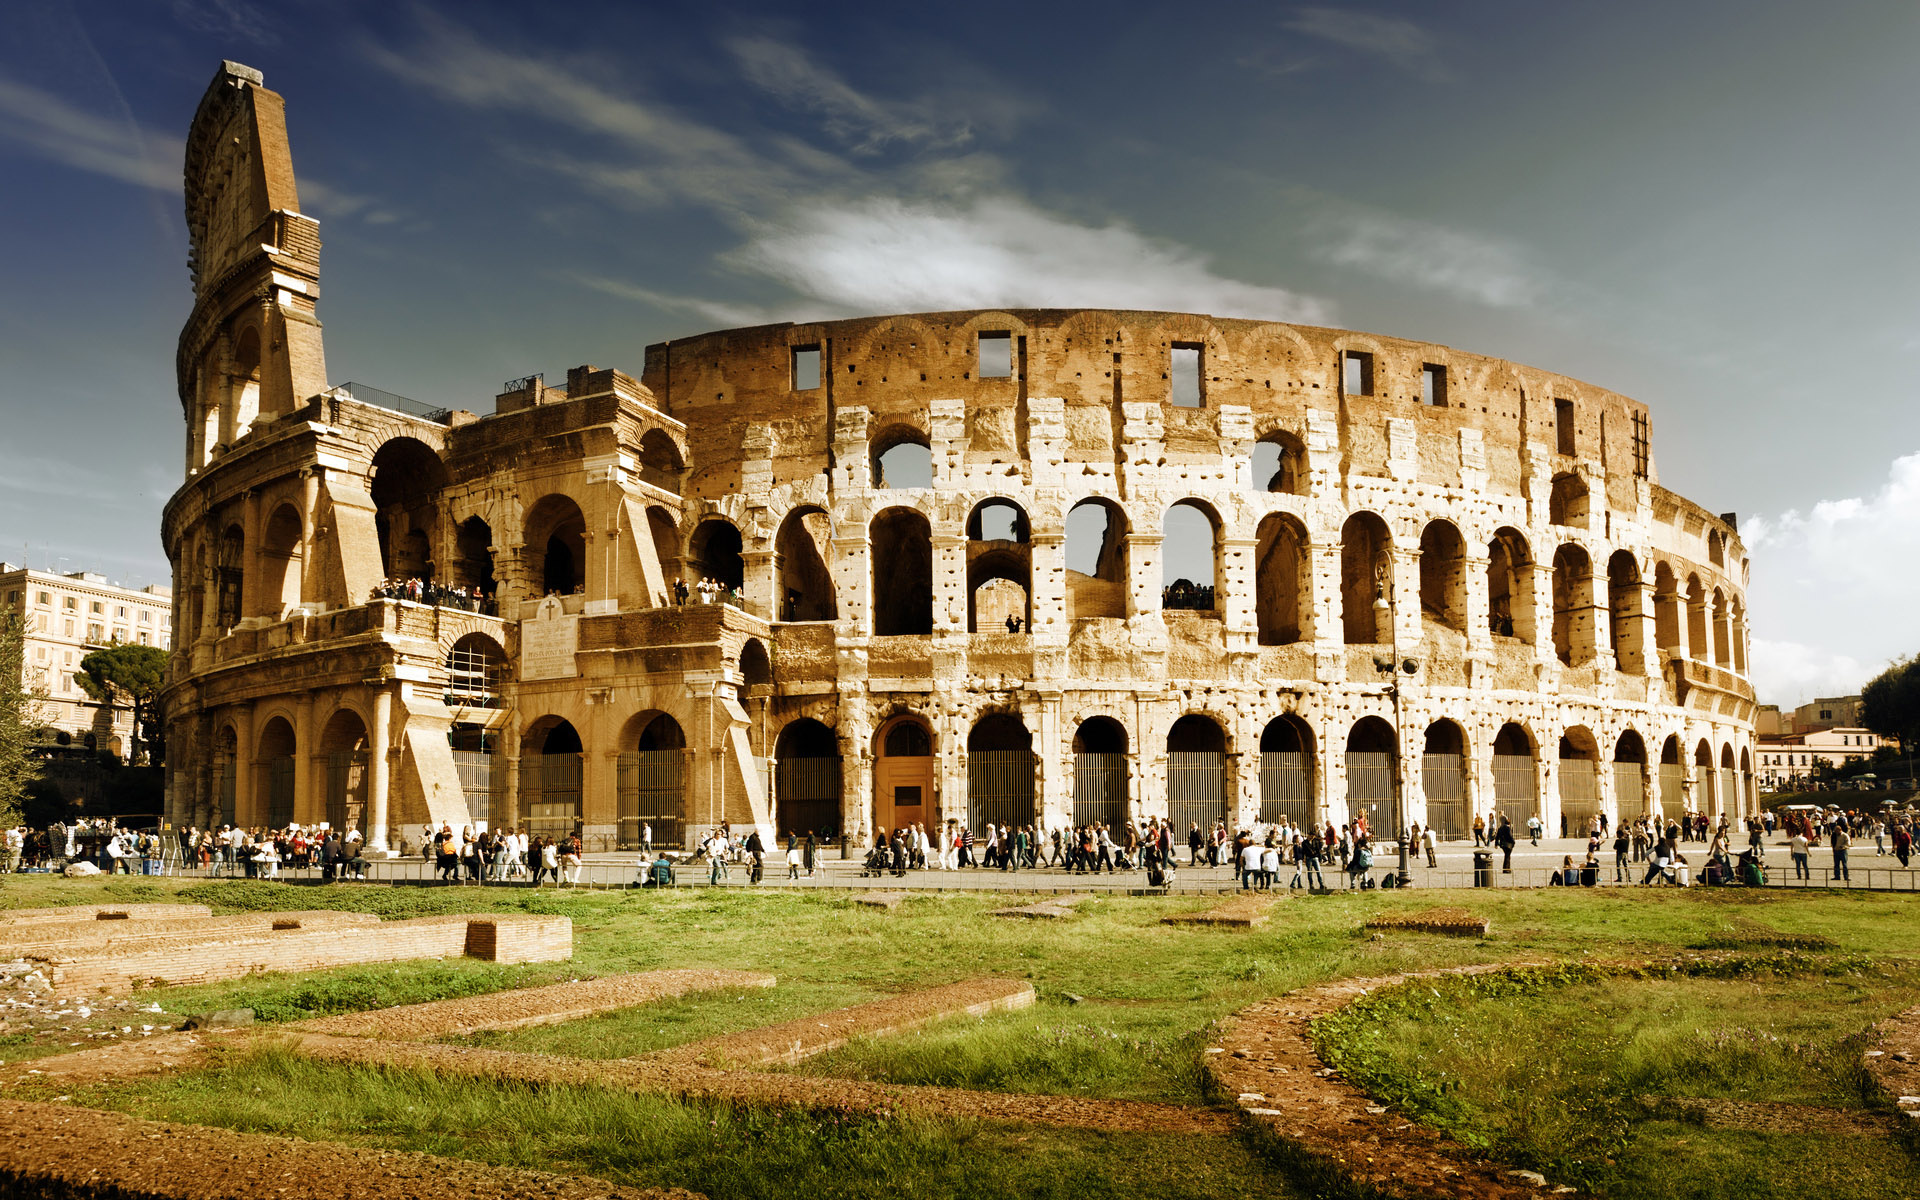 Colosseum in Rome - Eutourism